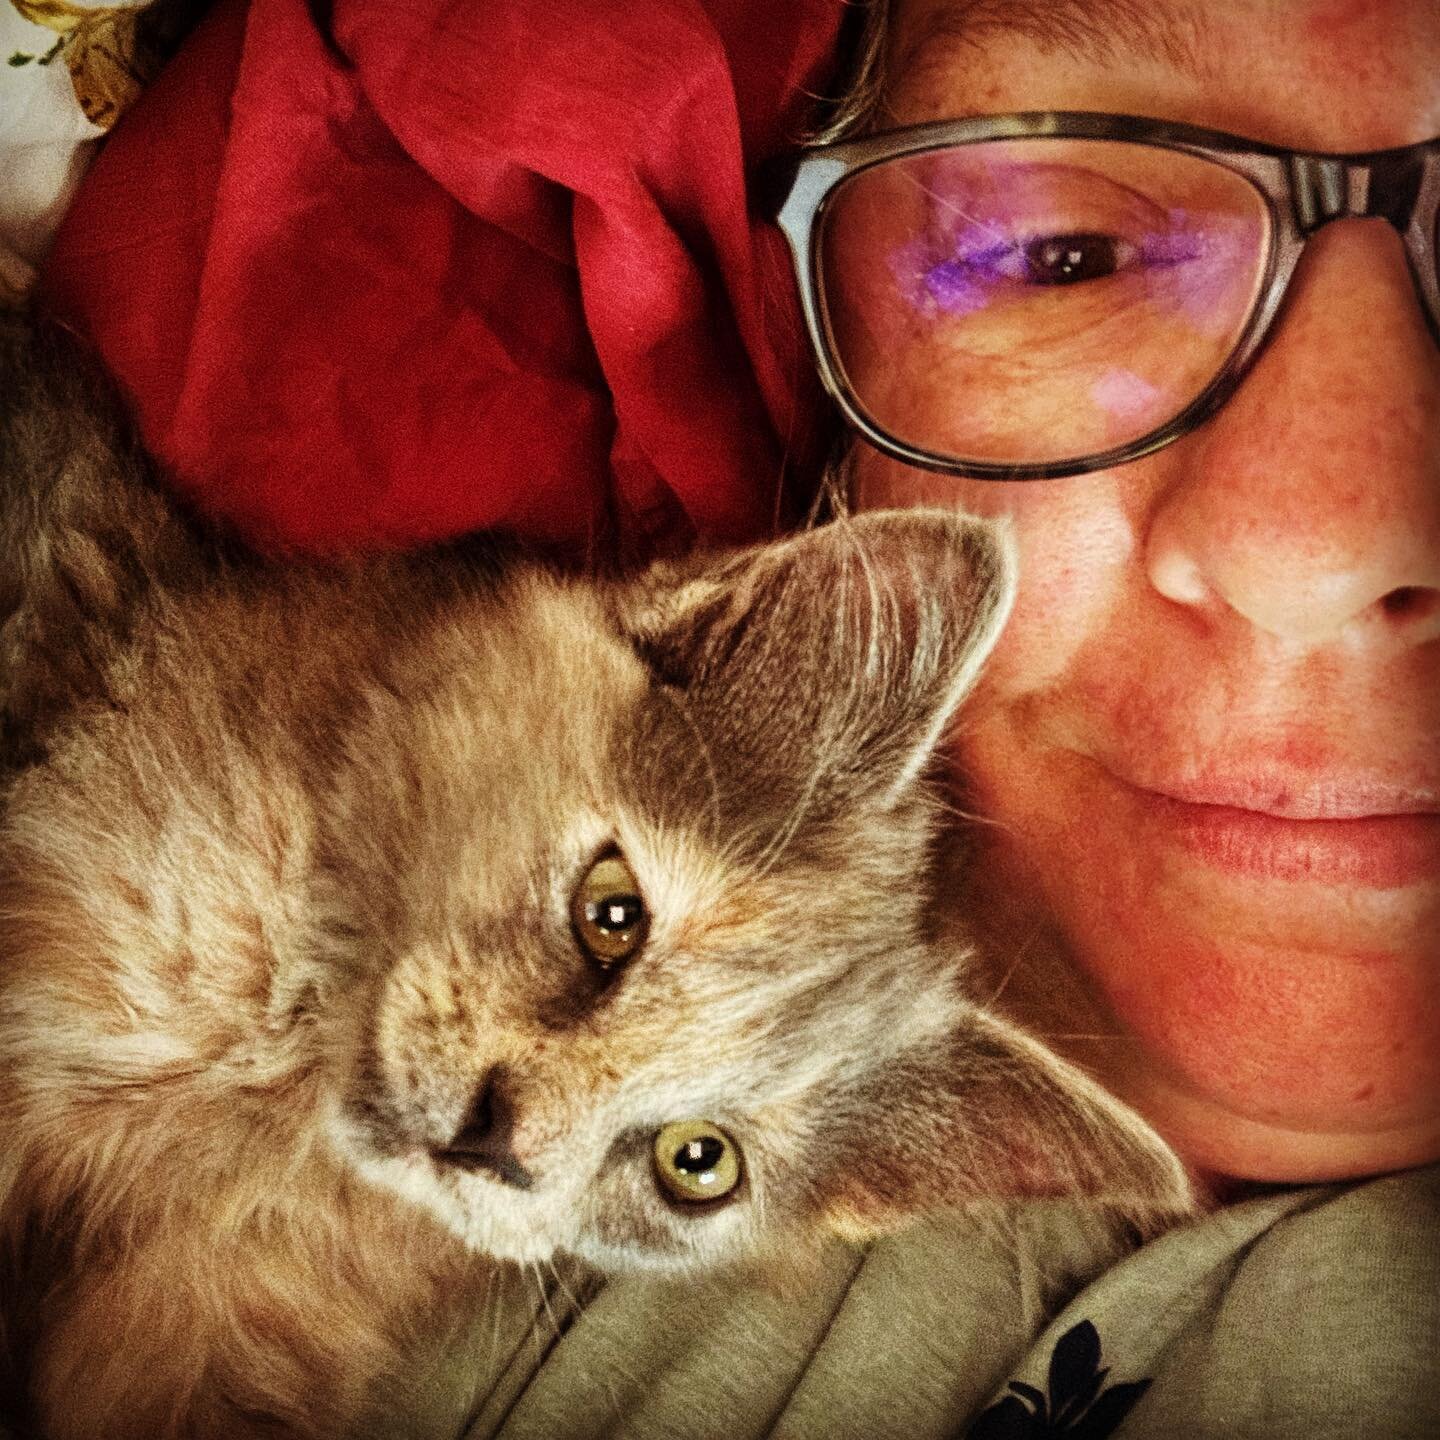 Waking up - a not so still life with midwife and her kitten&hellip;. #ilovebabyeverythings #ablemidwife #kittenenergy #topofthemorning